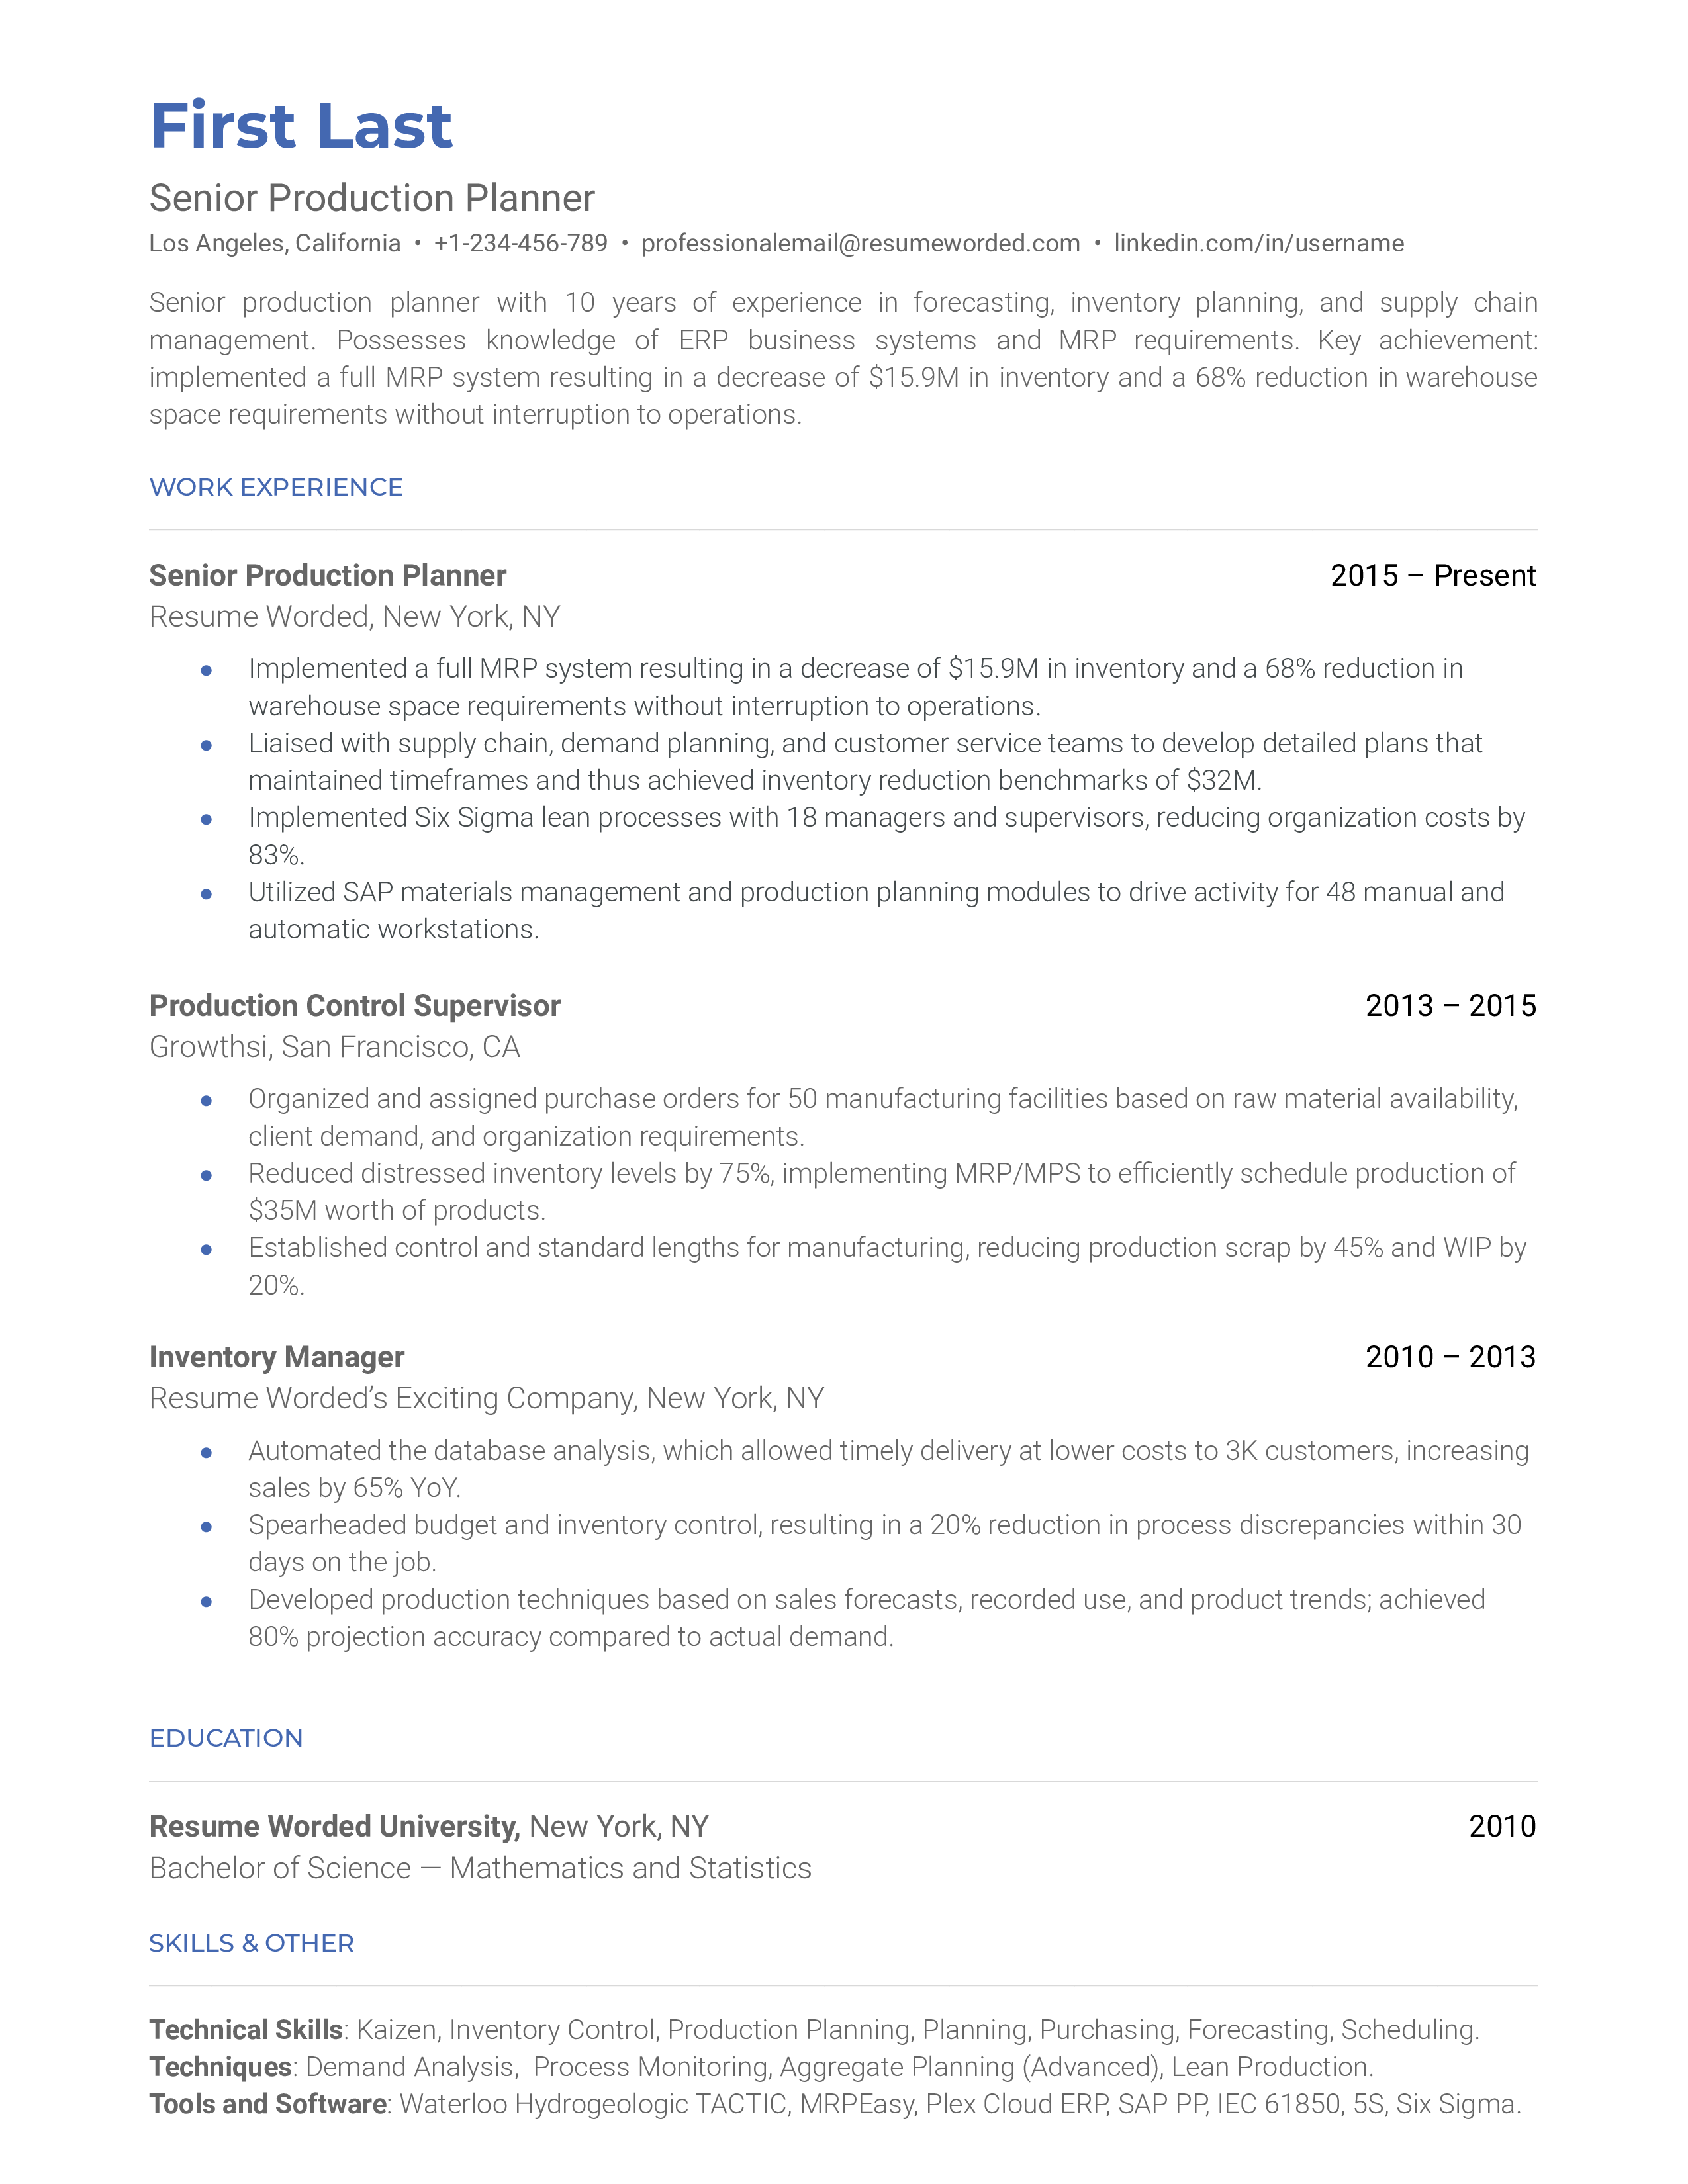 Senior Production Planner's CV showcasing experience and proficiency in production planning software.